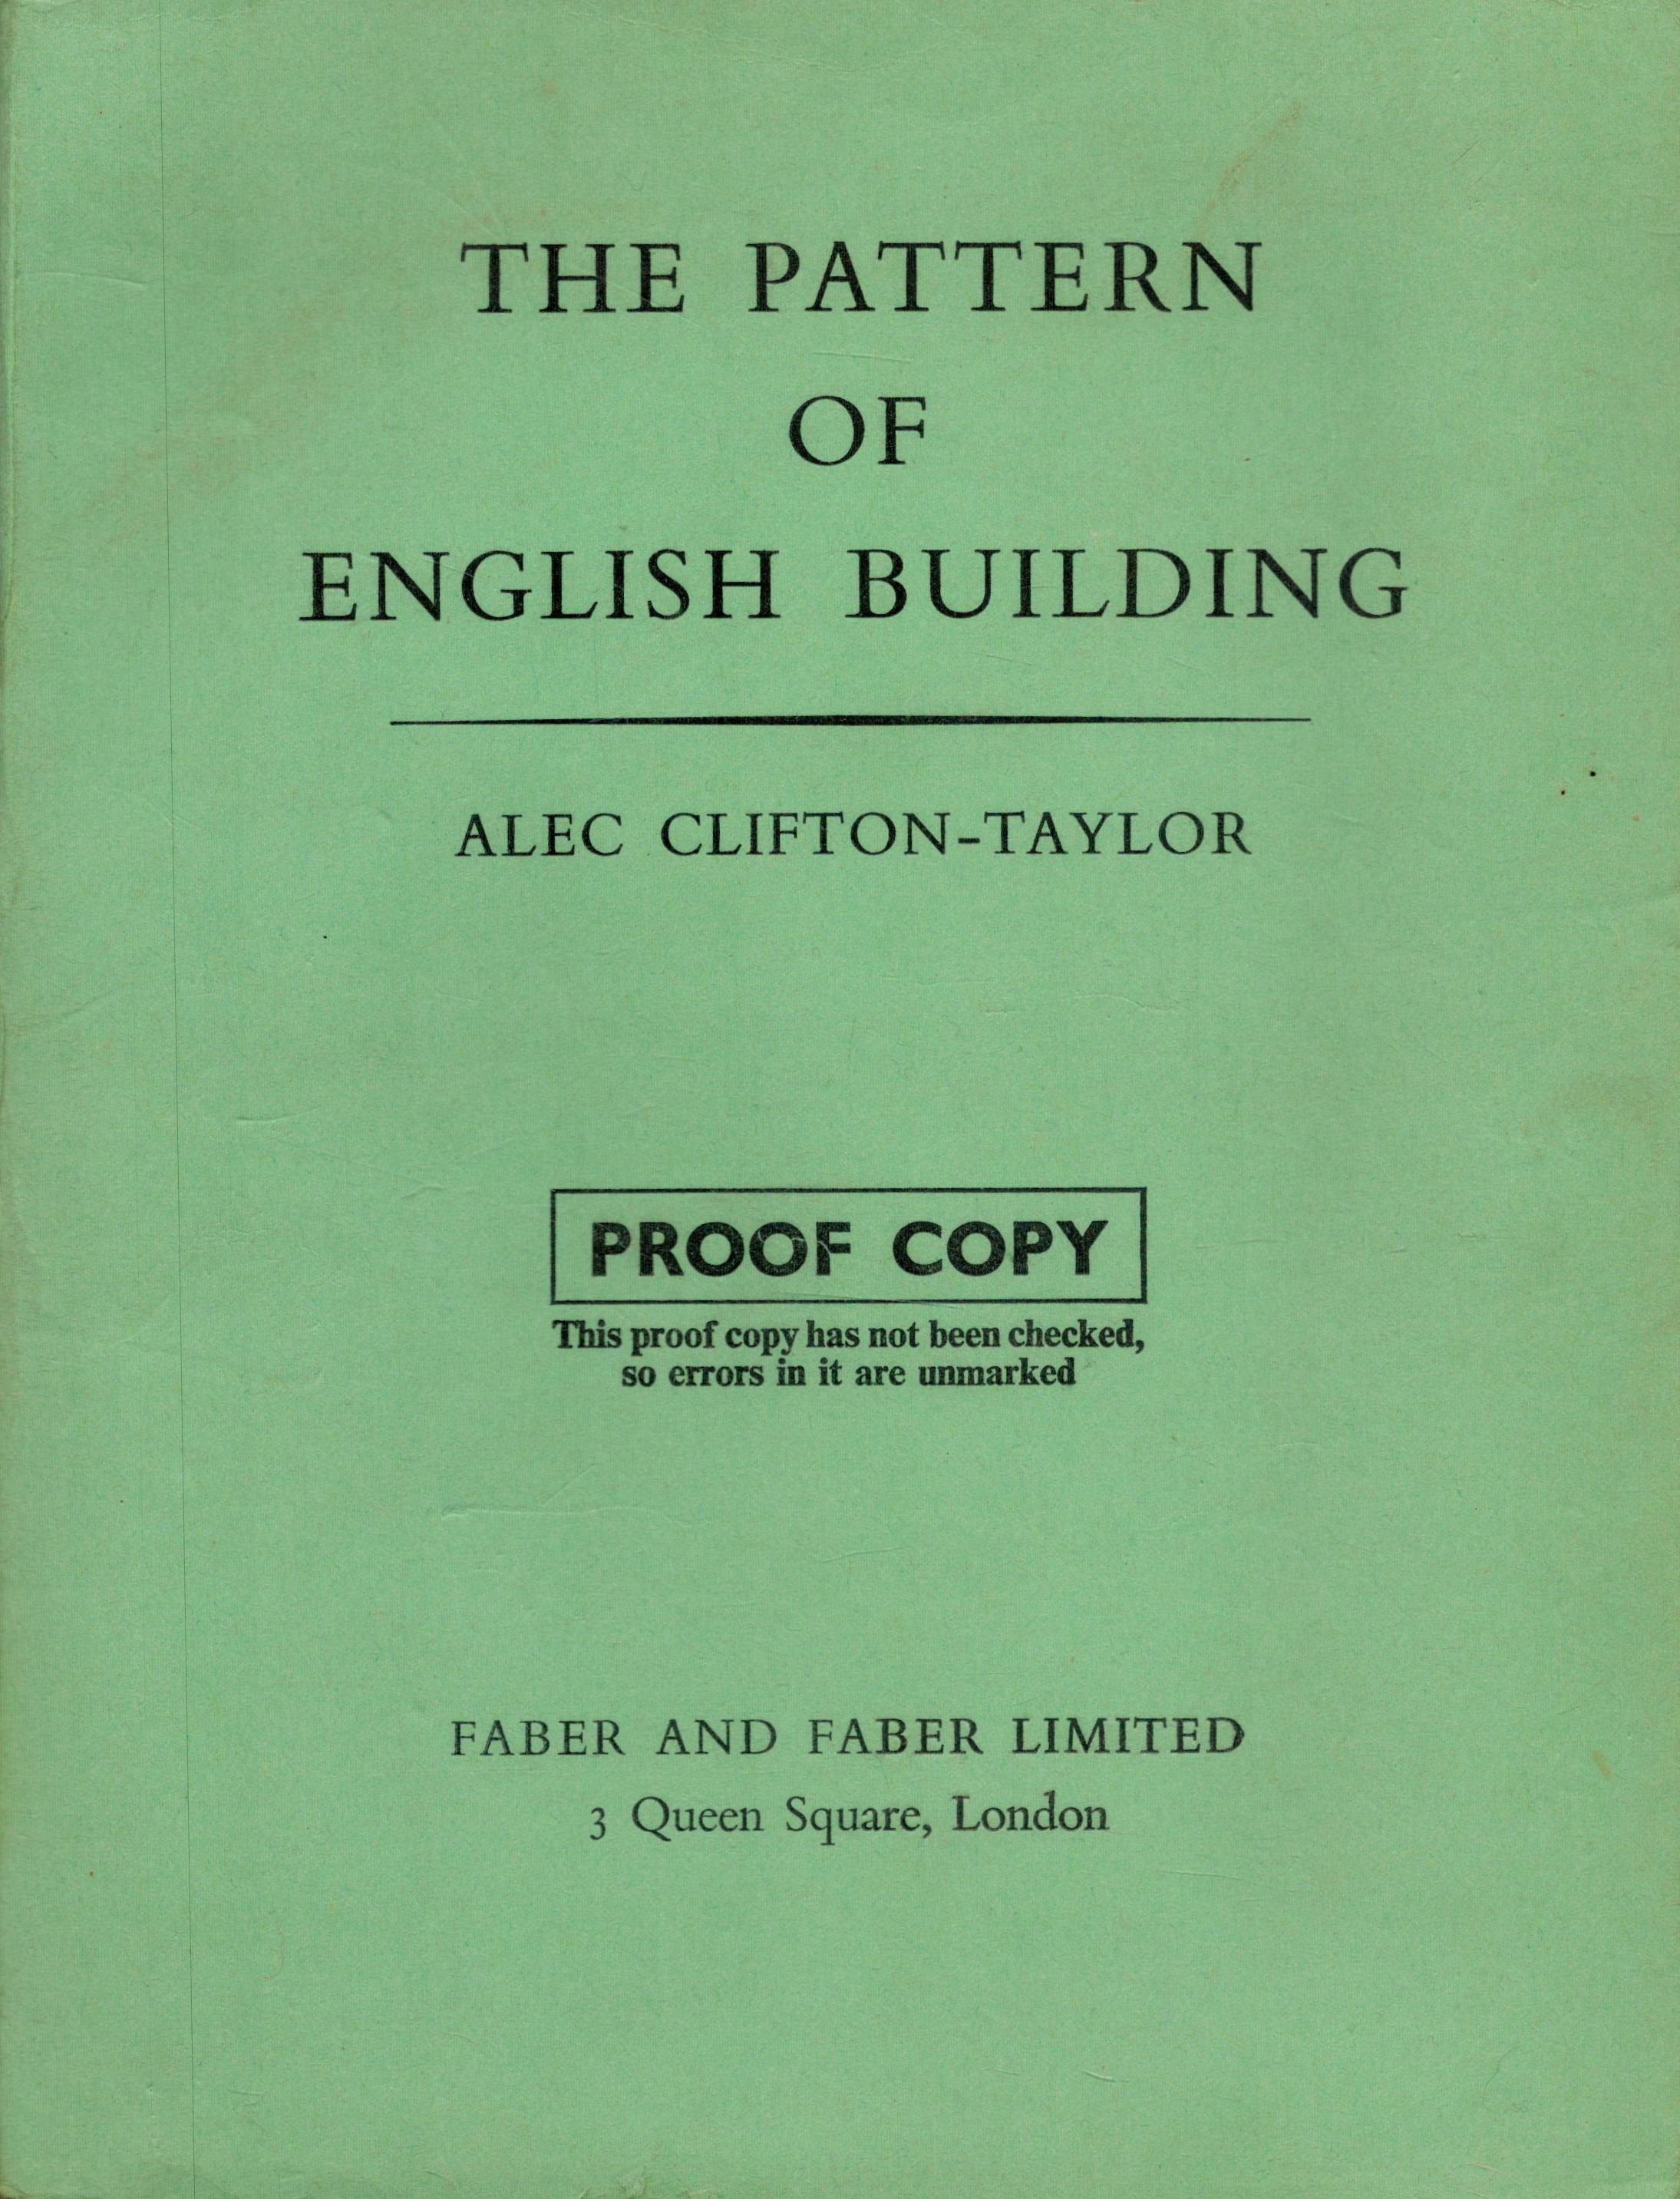 Alec Clifton-Taylor The Pattern of English Building. Published by Faber and Faber Ltd. London.